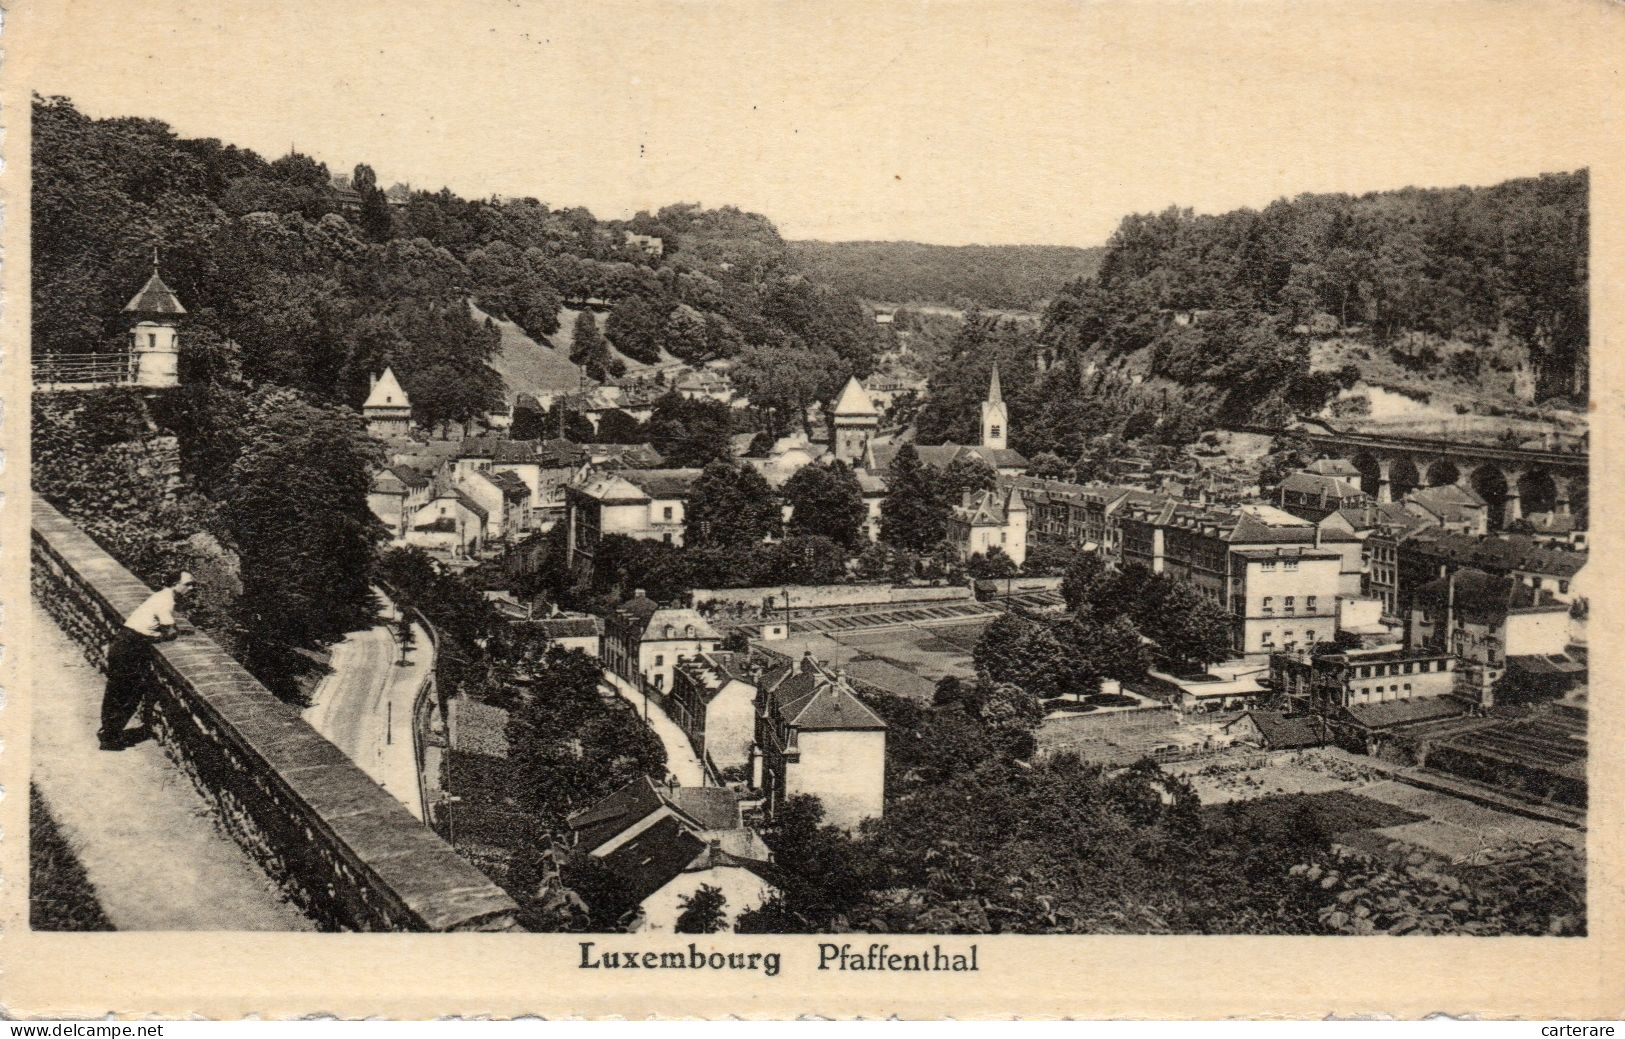 LUXEMBOURG,PFAFFENTHAL,1947 - Luxemburg - Town